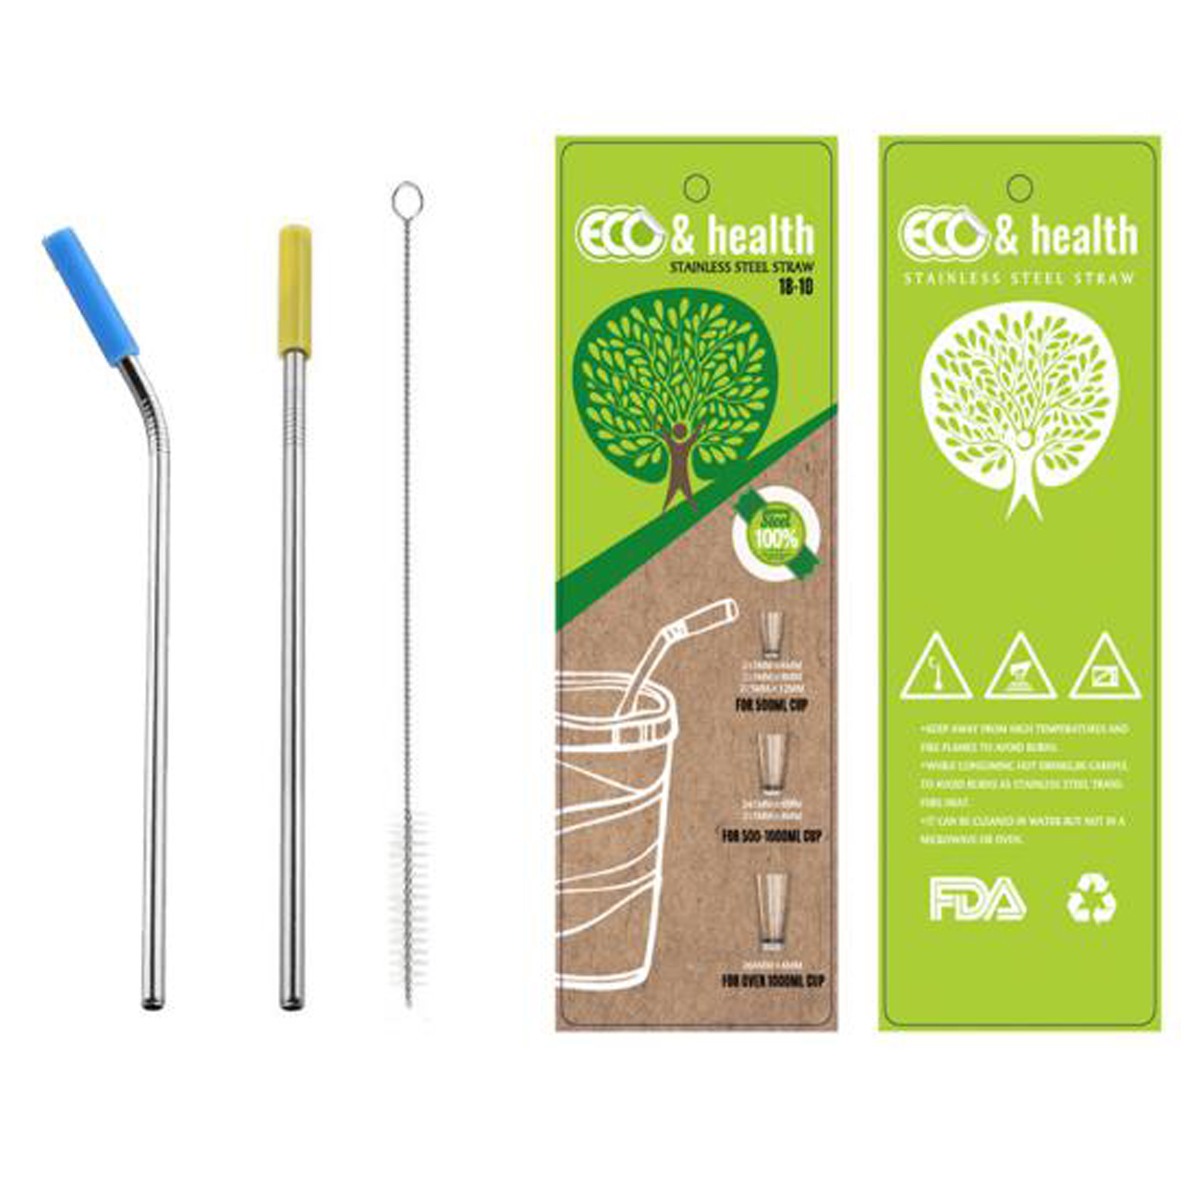 GL-ELY1269 3 in 1 Metal Straw Set with Blister Package